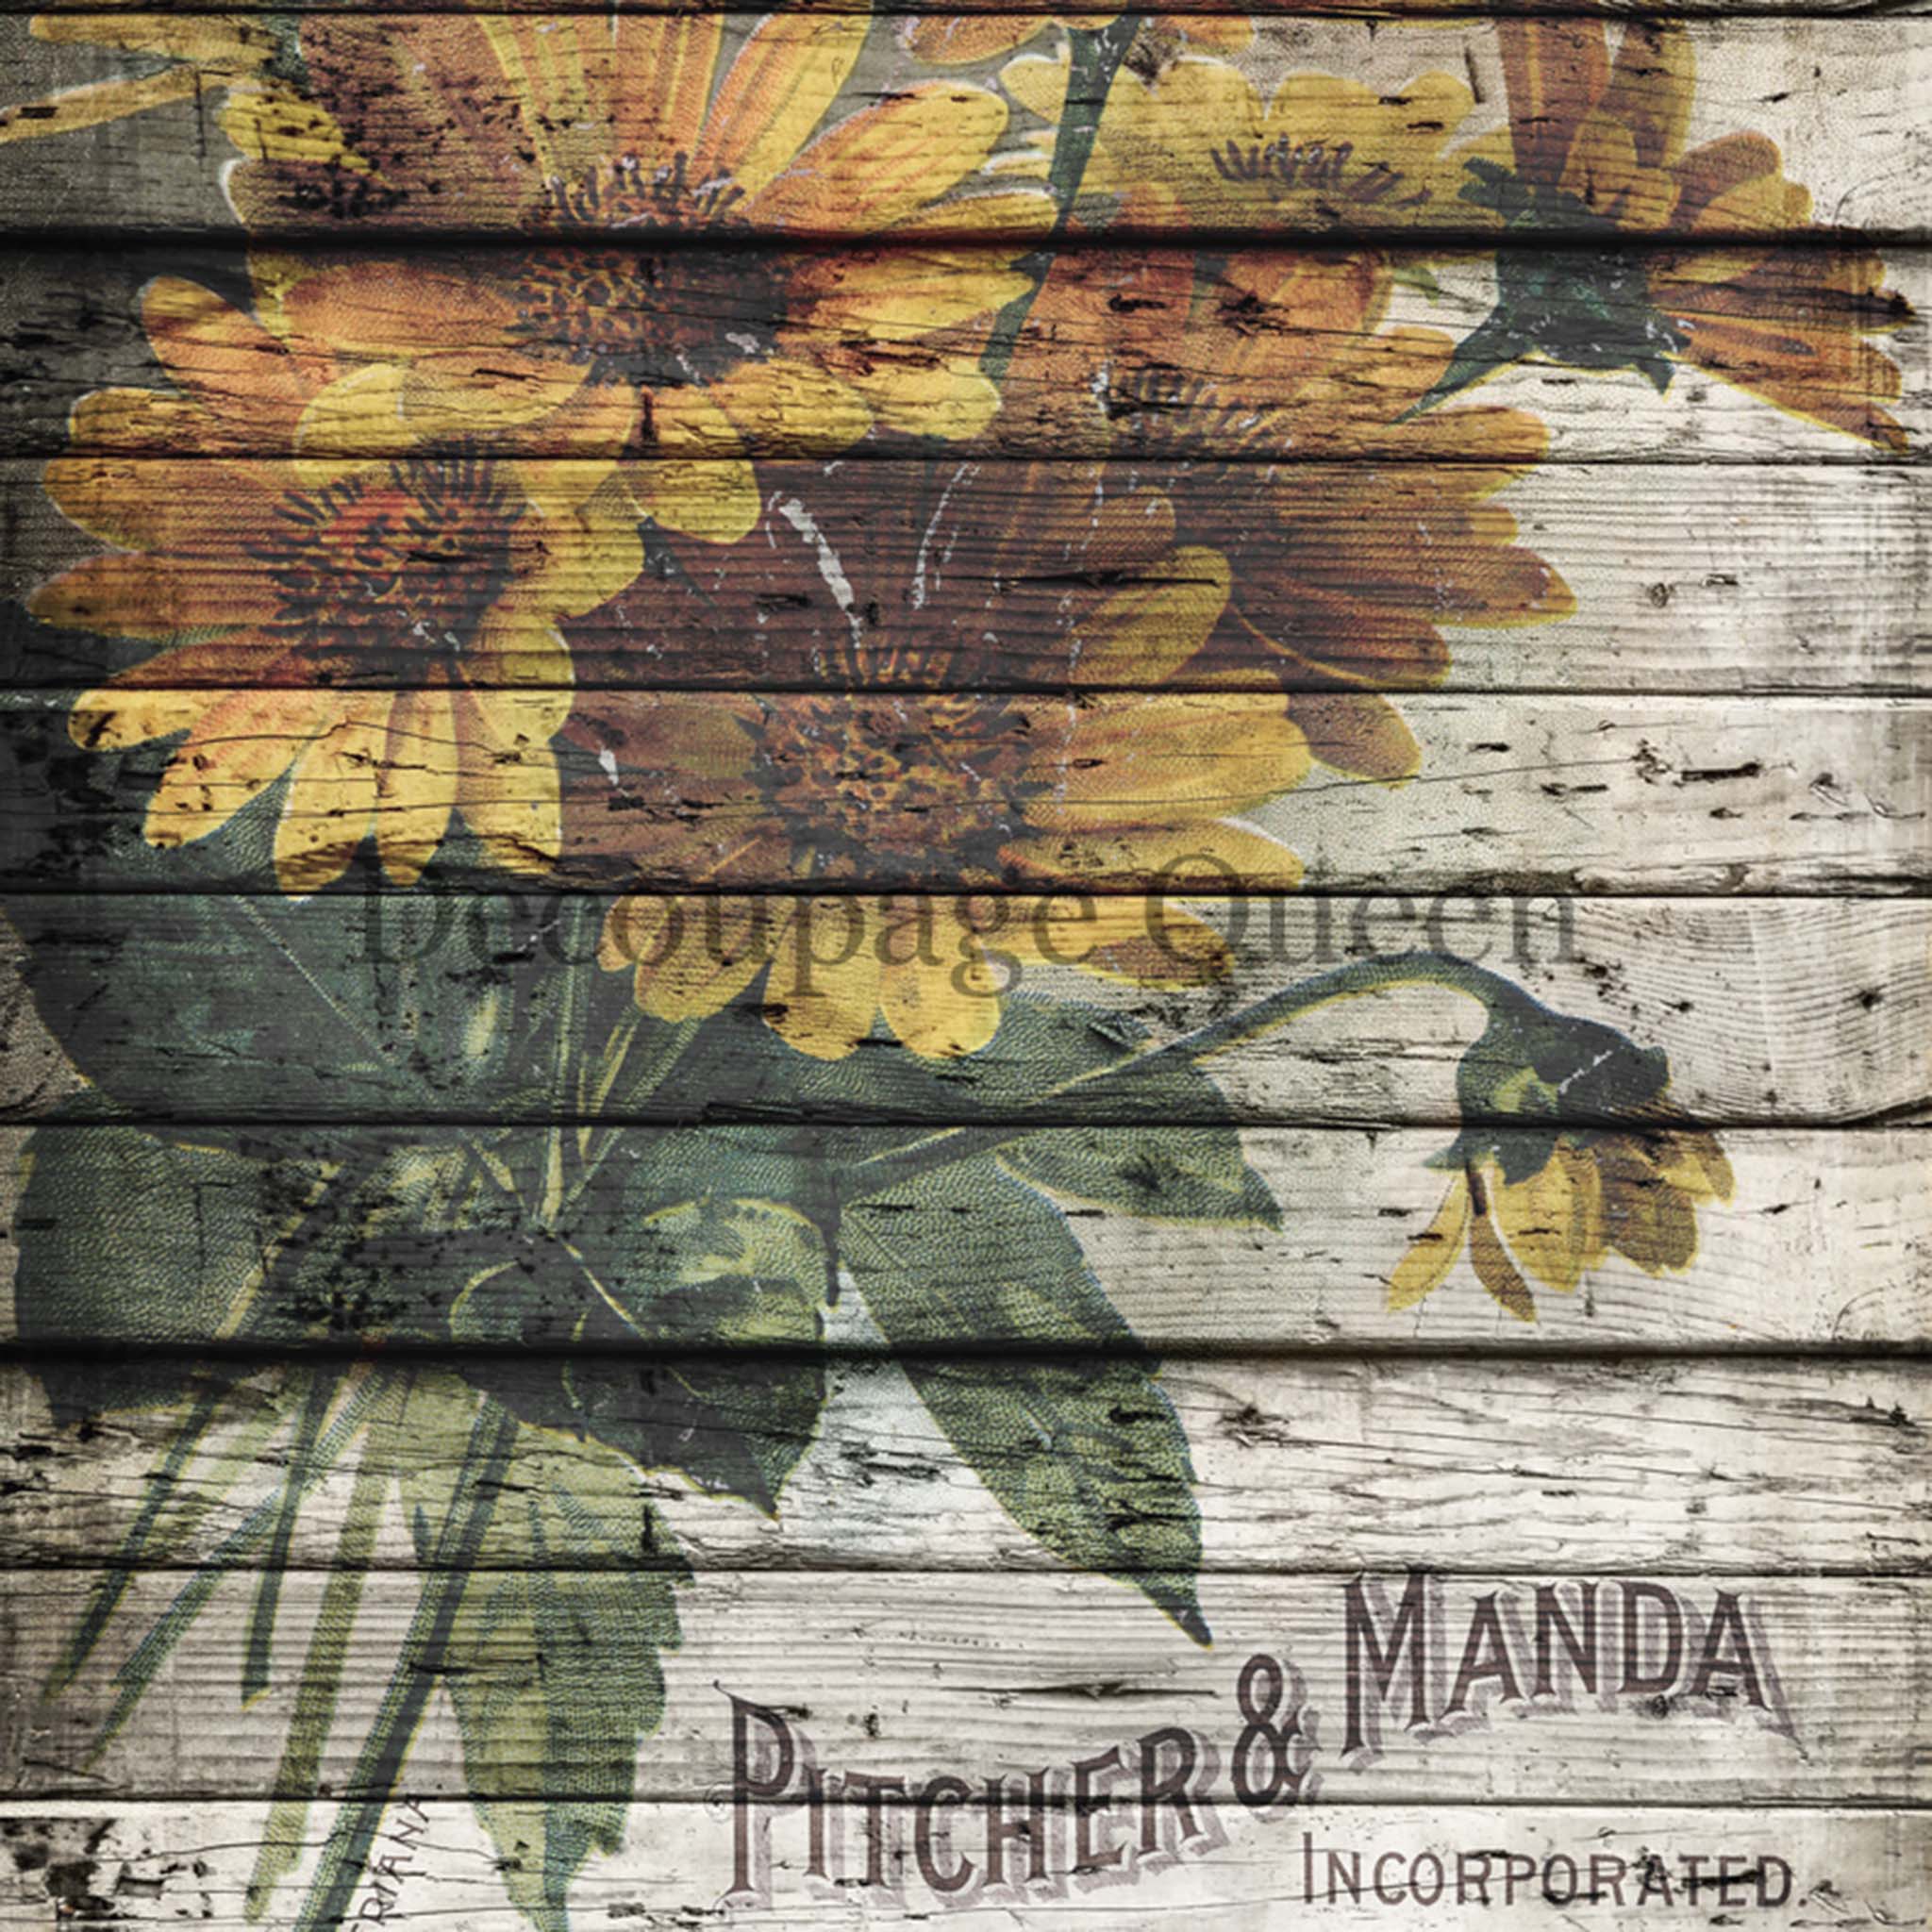 A3 rice paper design that features weathered wood with a bouquet of yellow flowers and printed text that reads: Pitcher & Manda Incorporated, Short Hills, New Jersey, USA.